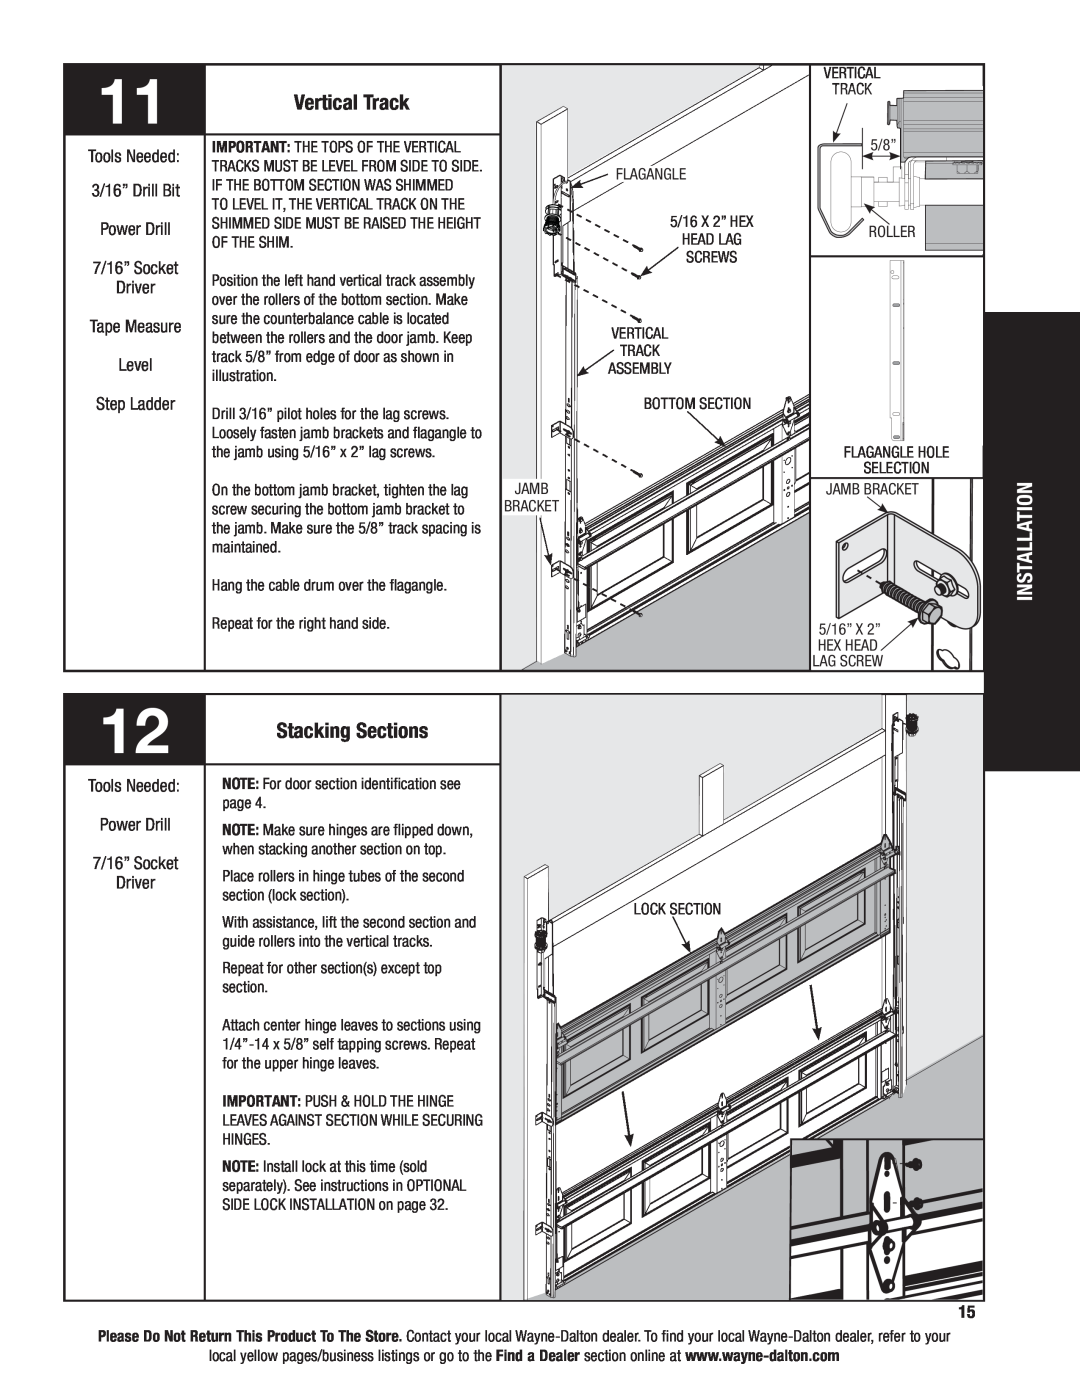 Wayne-Dalton 46 installation instructions Vertical Track, Stacking Sections, Installation 